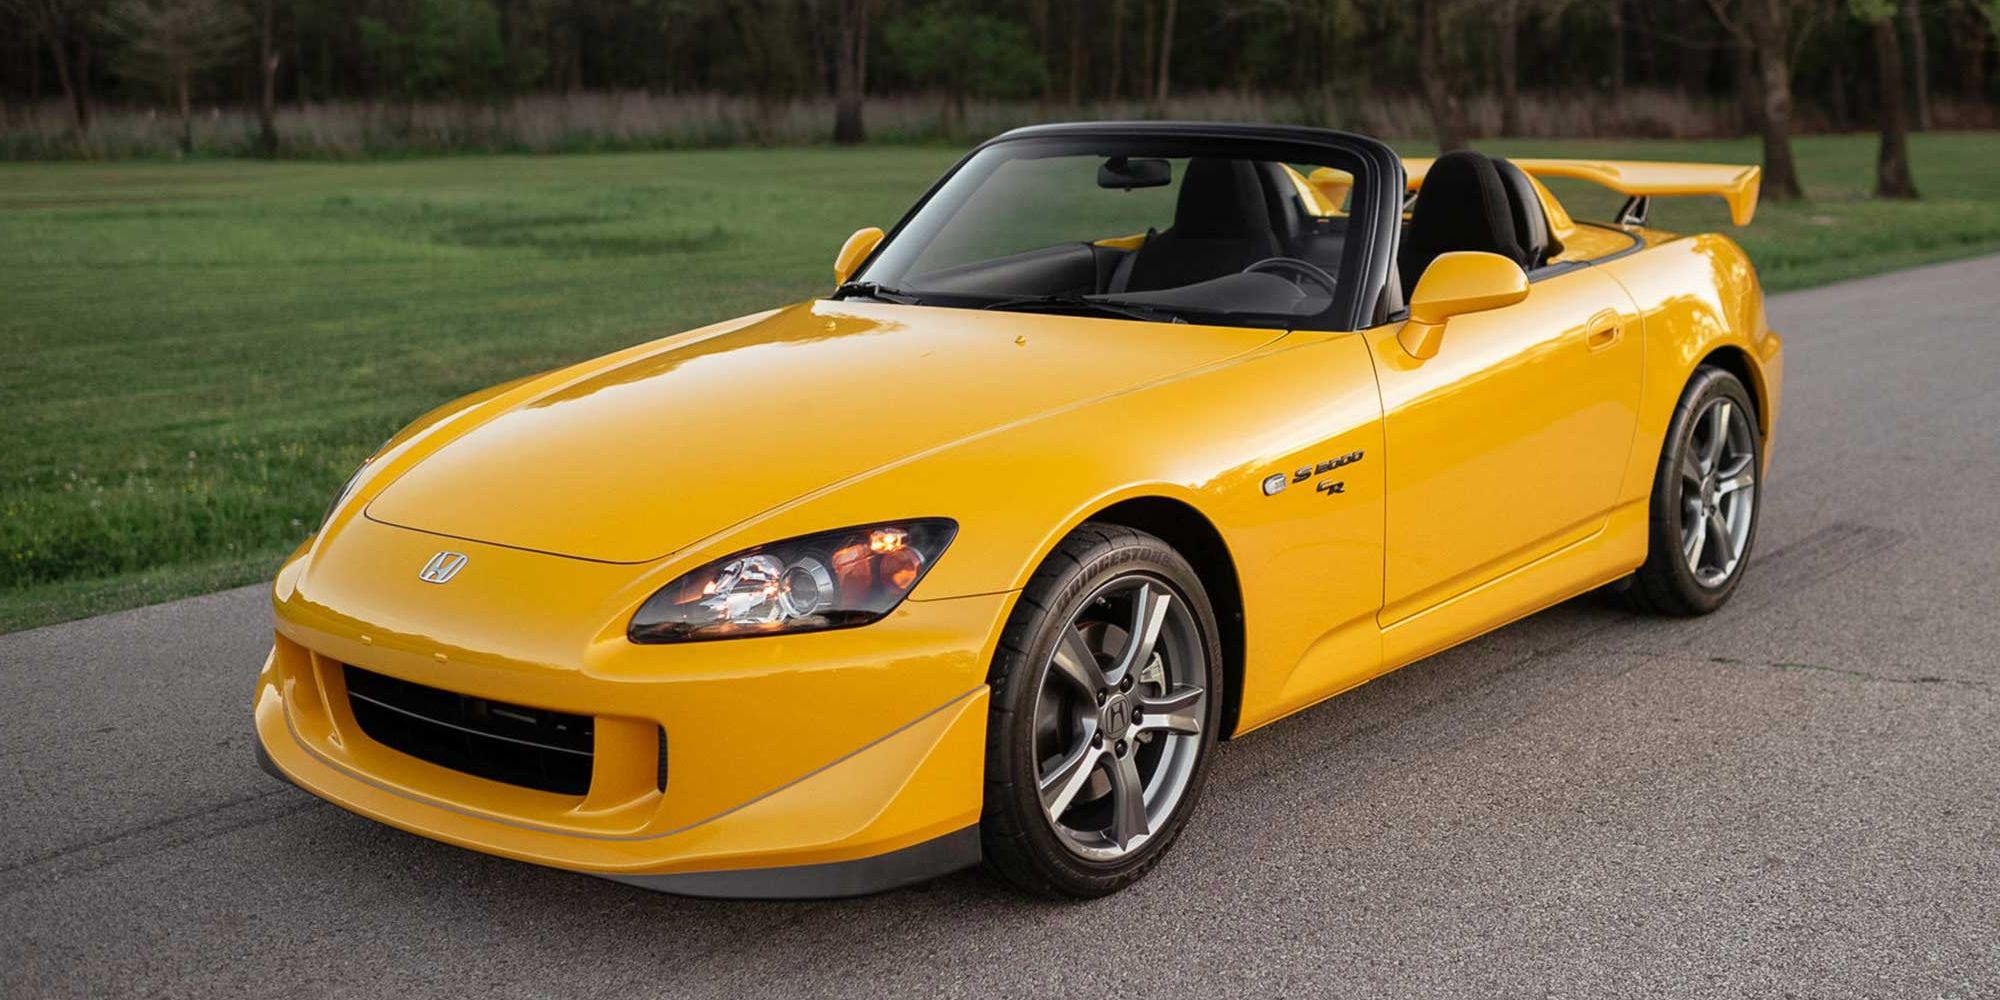 Front 3/4 view of the S2000